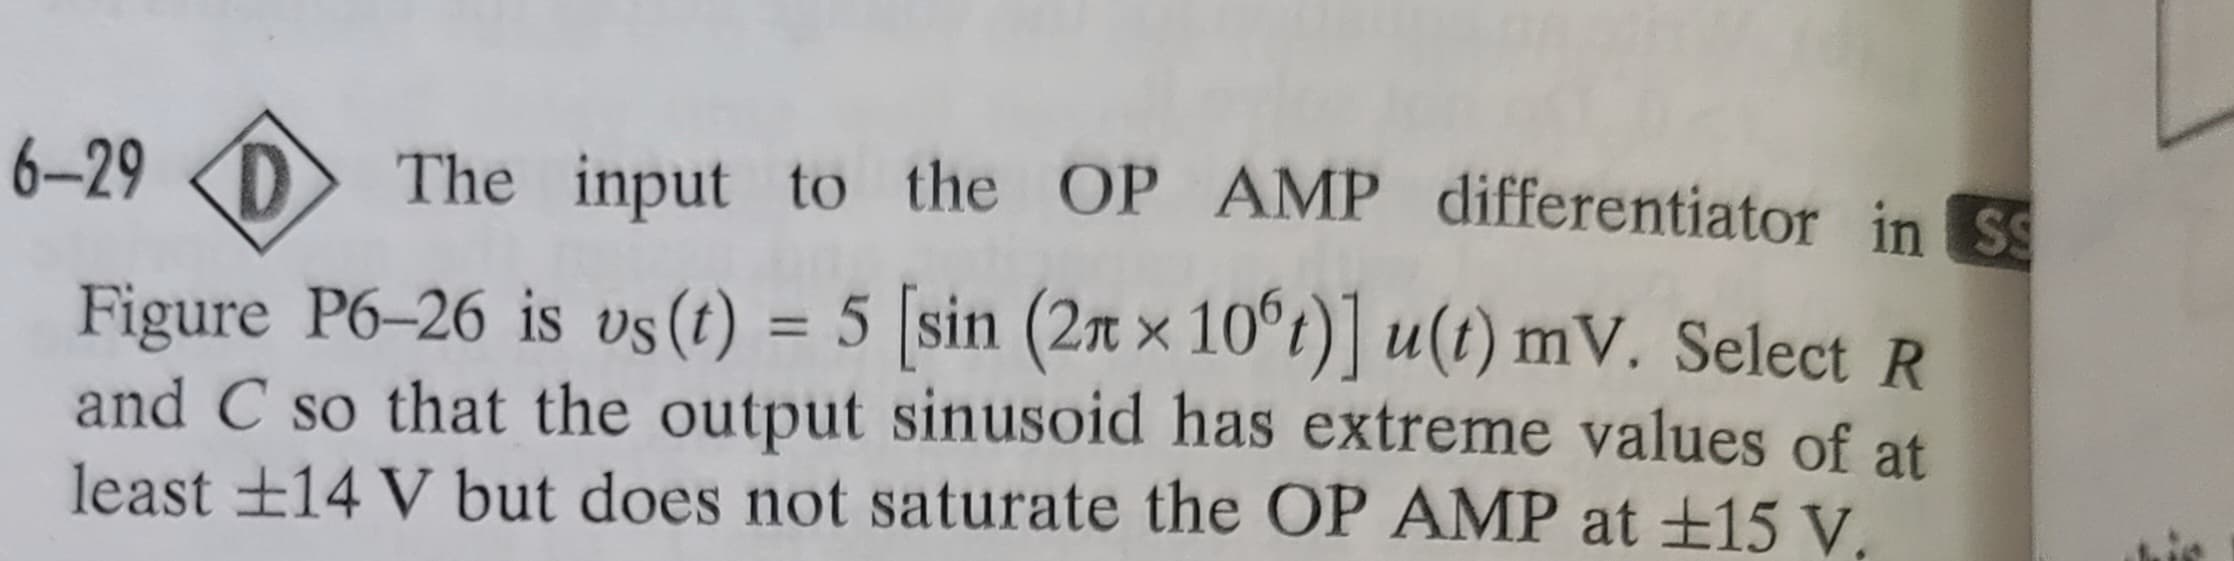 6-29 D The input to the OP AMP differentiator in Ss
Figure P6-26 is vs (t) = 5 [sin
(2₁
(2xx 10°t)] u(t) mV. Select R
and C so that the output sinusoid has extreme values of at
least ±14 V but does not saturate the OP AMP at £15 V.